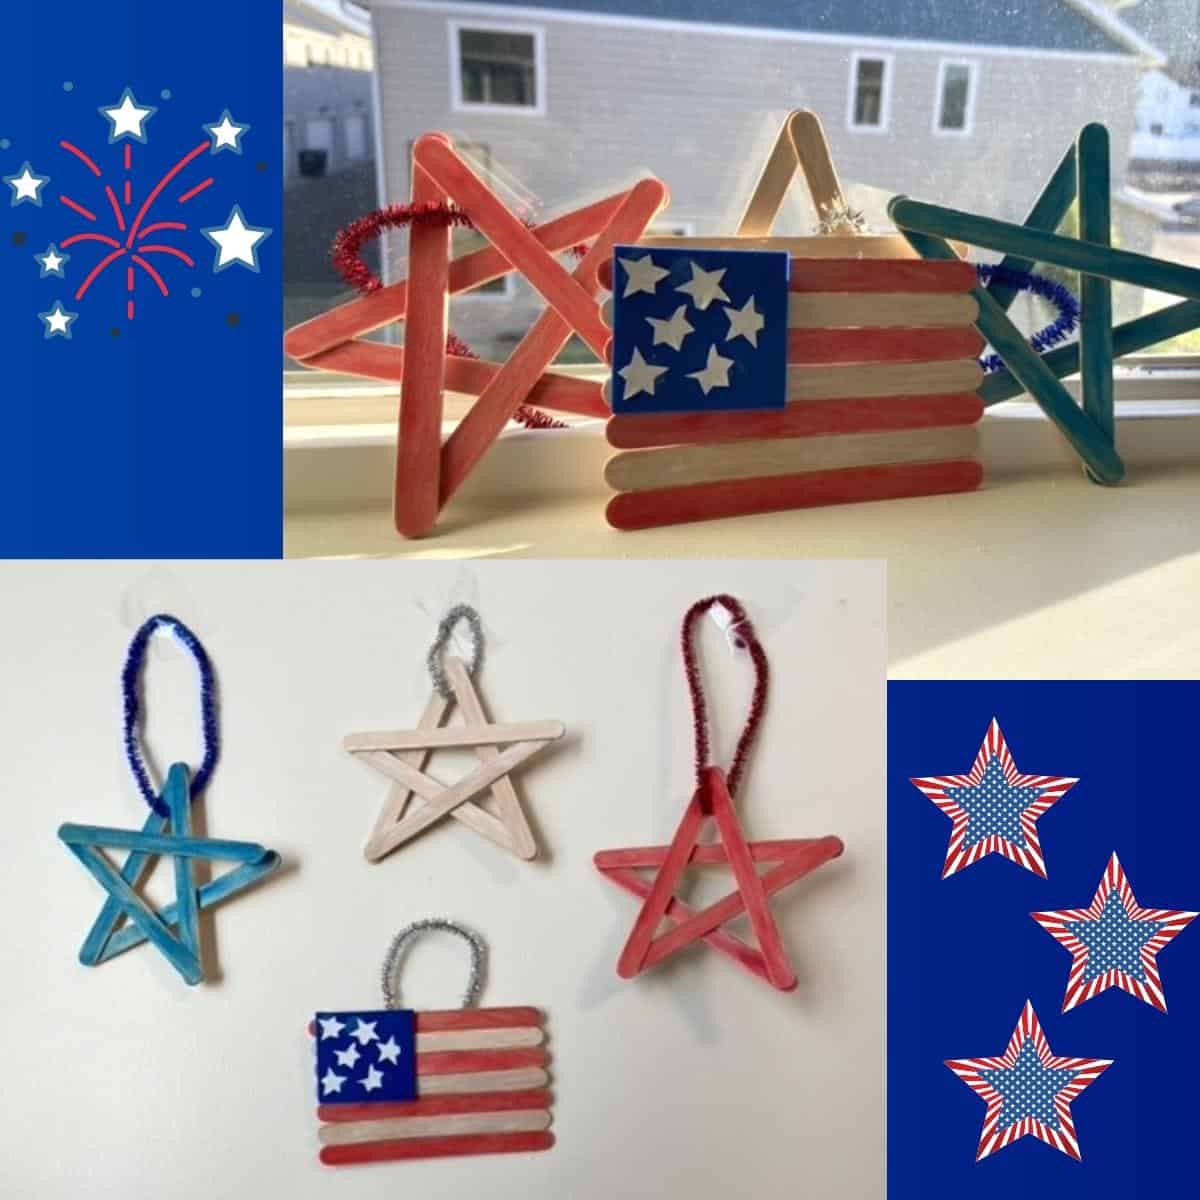 Popsicle Stick American Flag: July 4th Fun and Easy Craft for Kids!